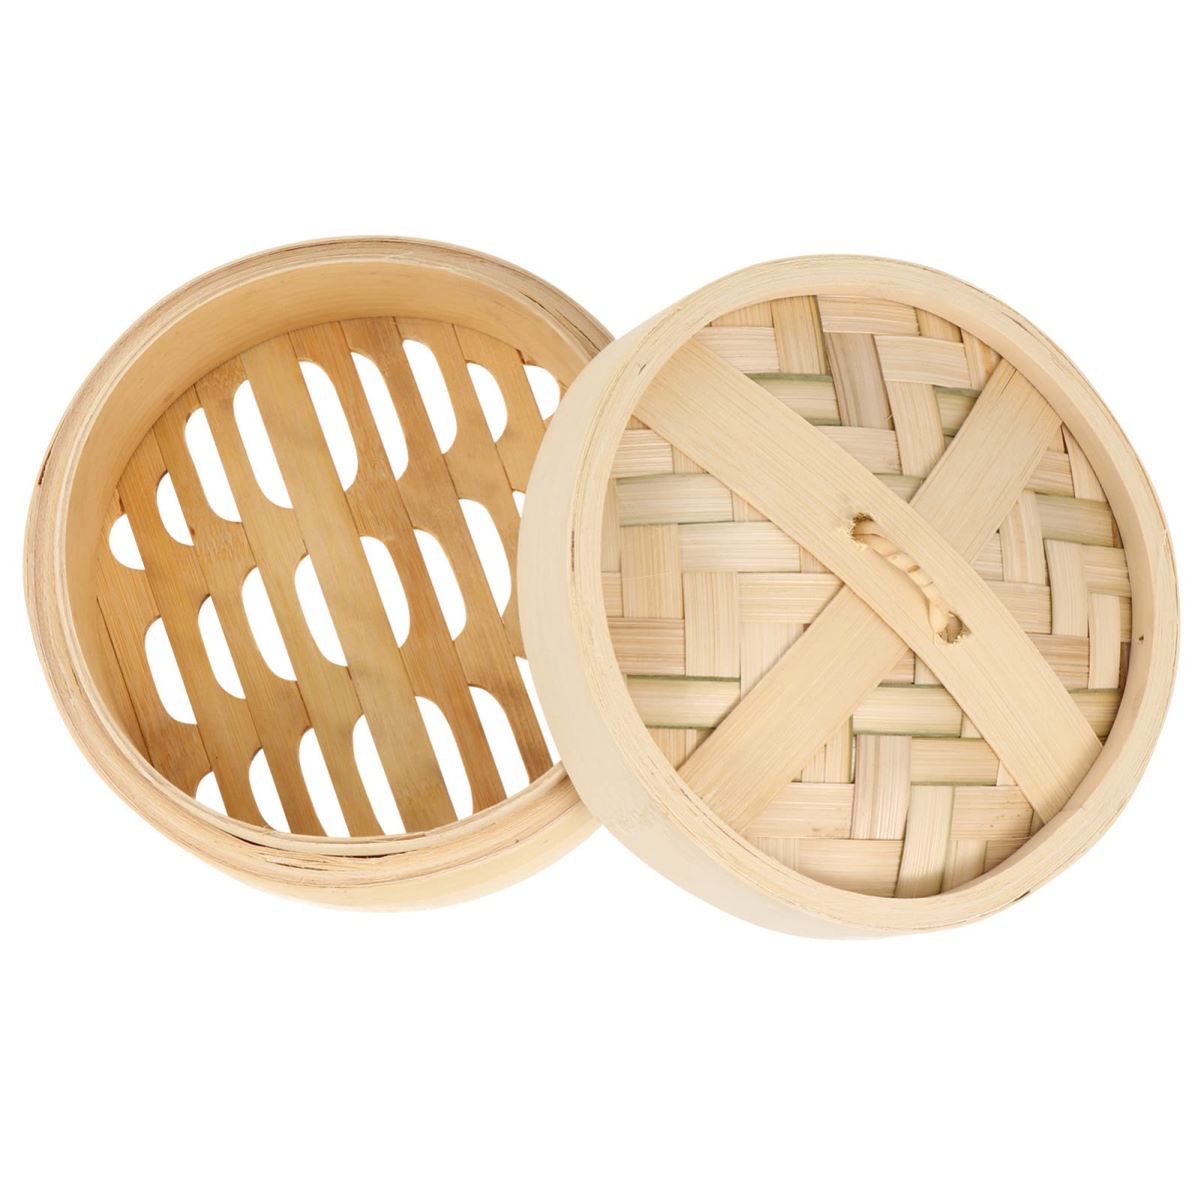 Buy IAG Products Bamboo Steamer (1 Lid and 1 Base) - 10 inch